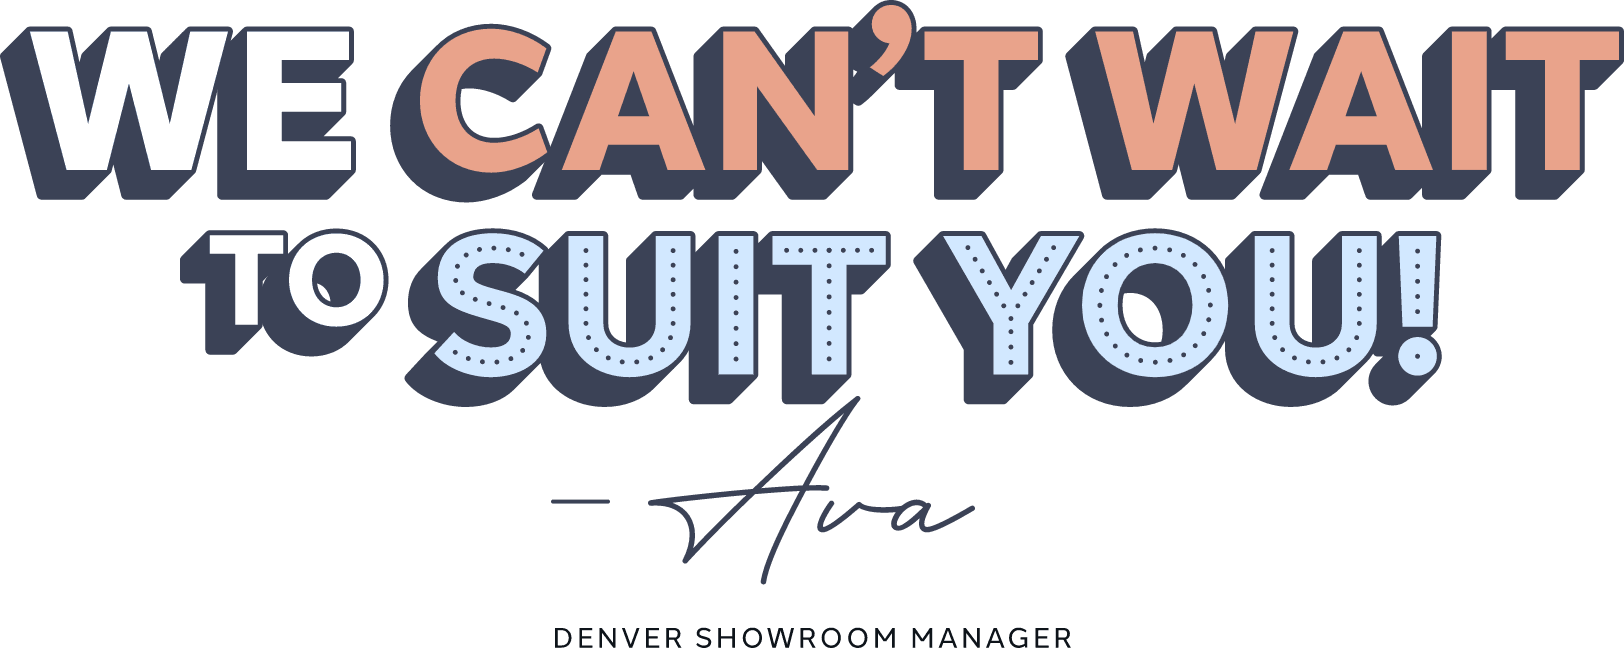 Colorful typography reading “We can't wait to suit you.” from Ava, Denver suit store manager.